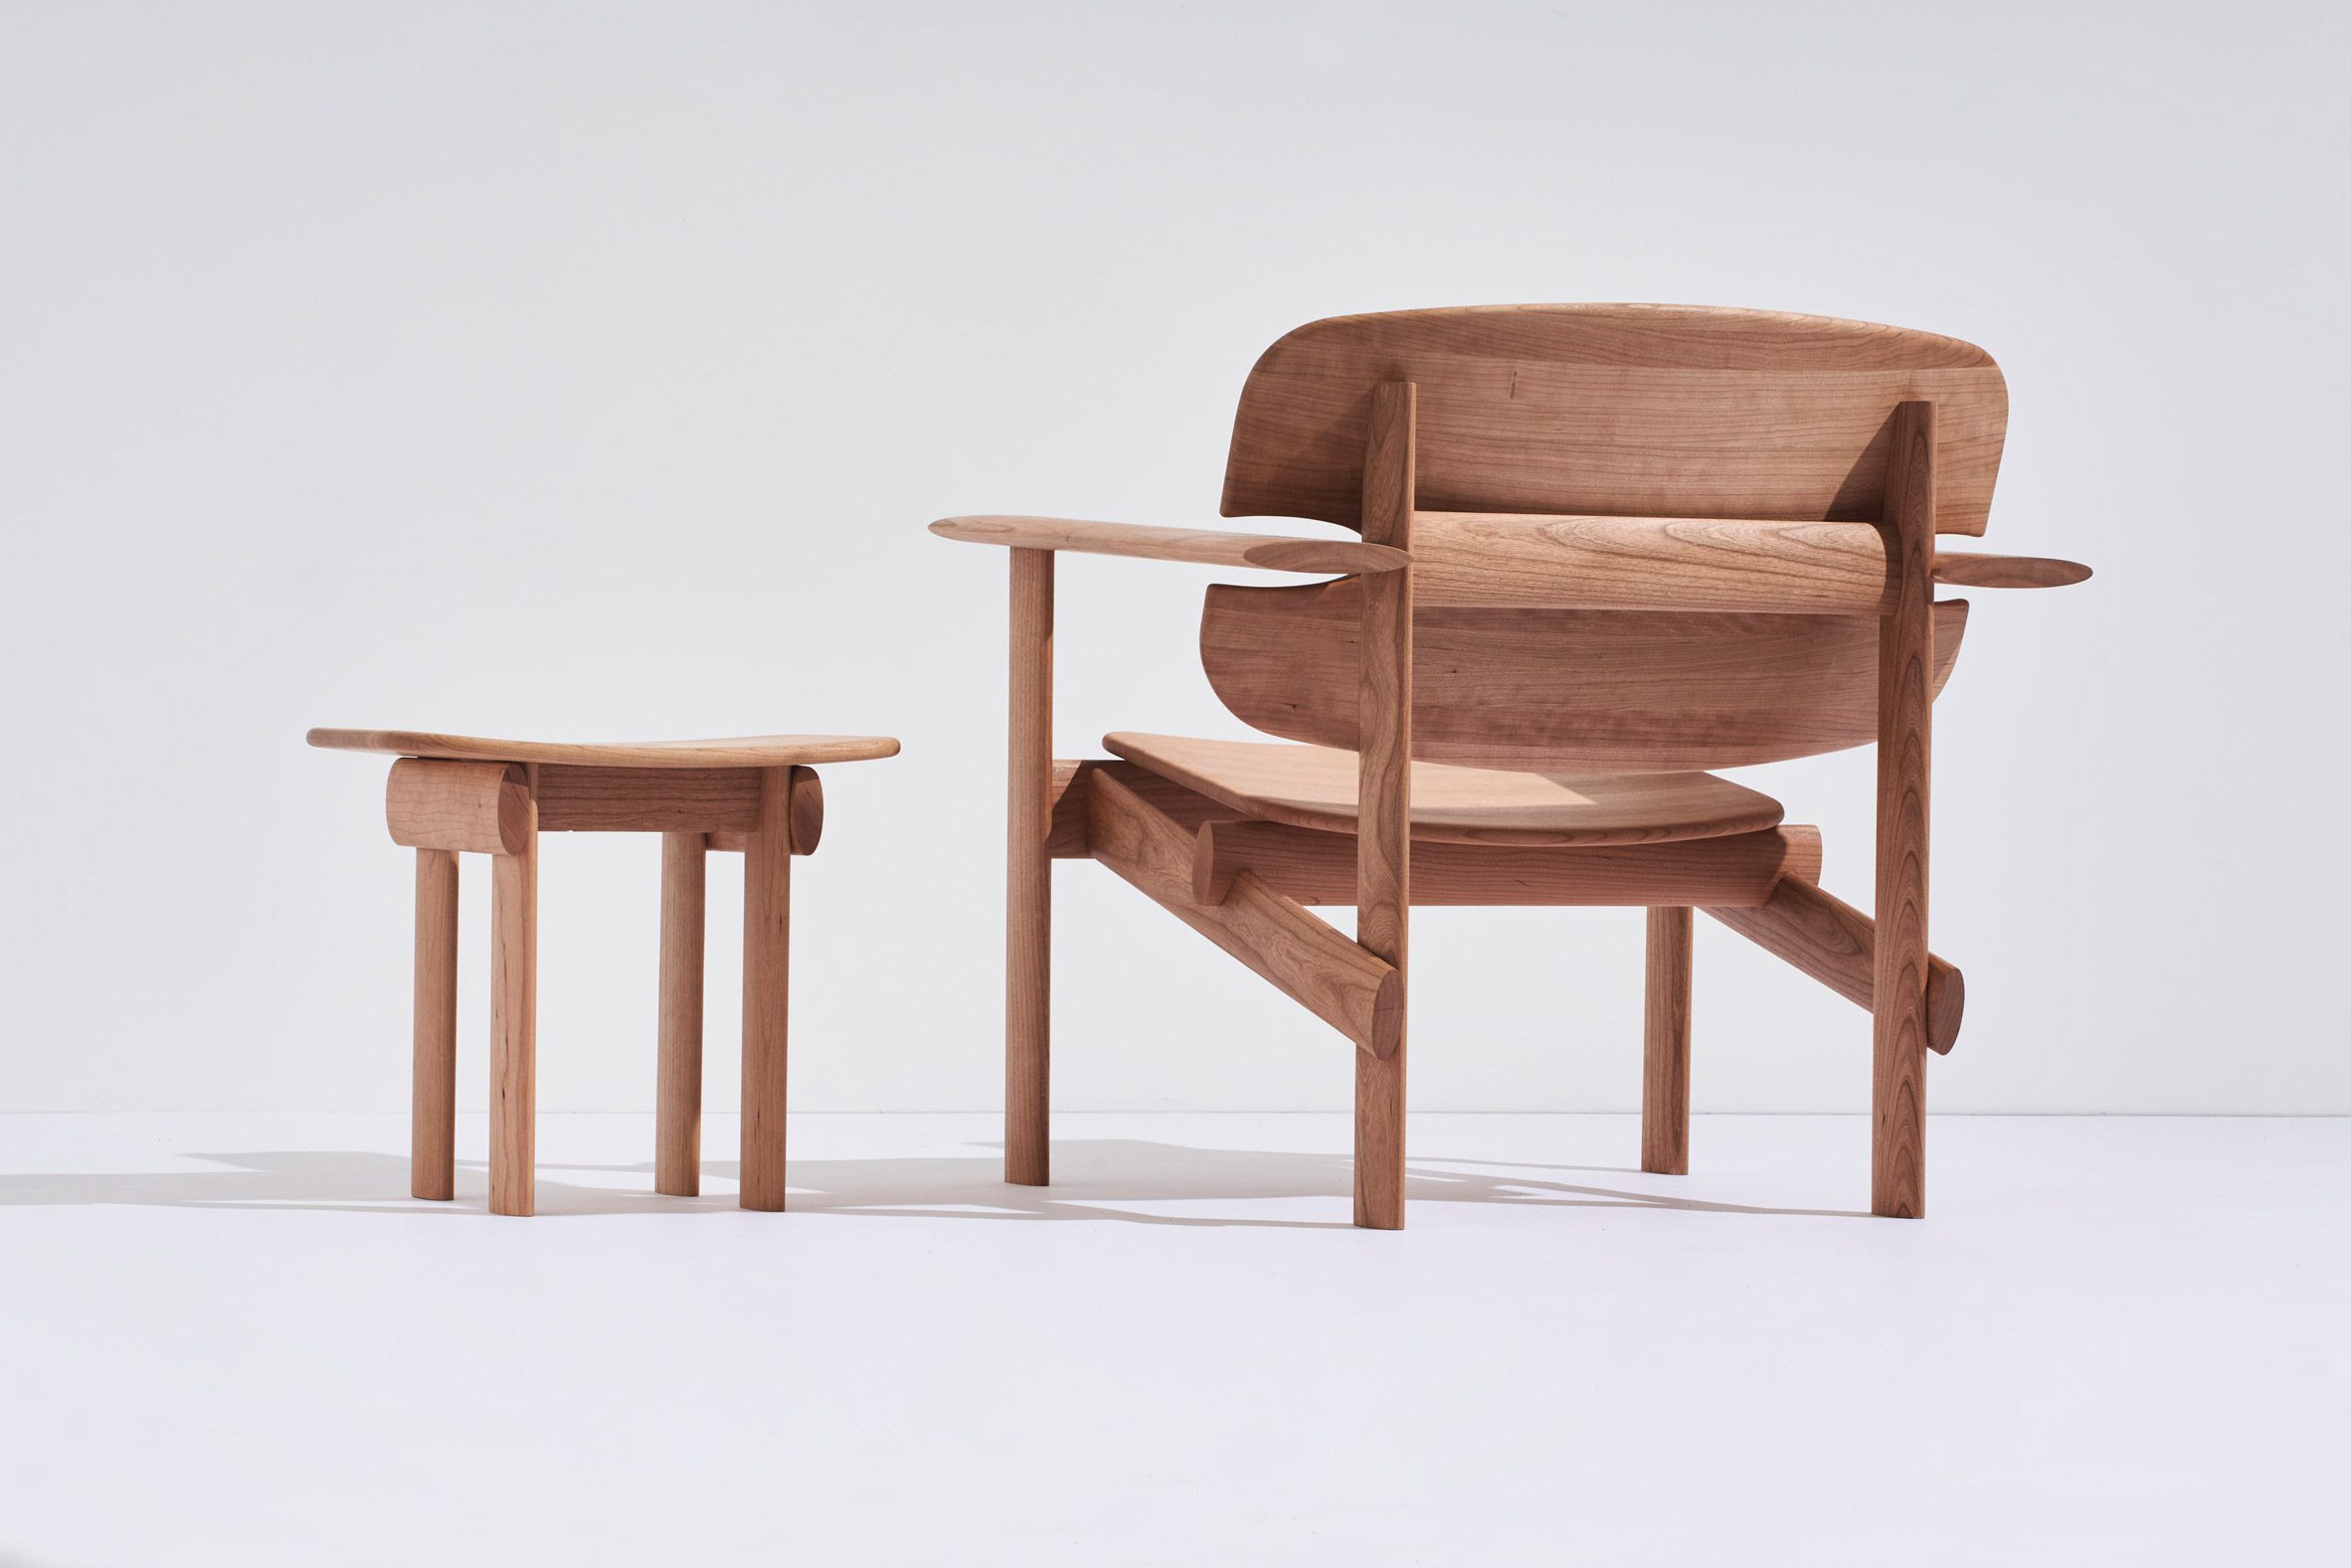 Mac Collins' Concur chair and side table